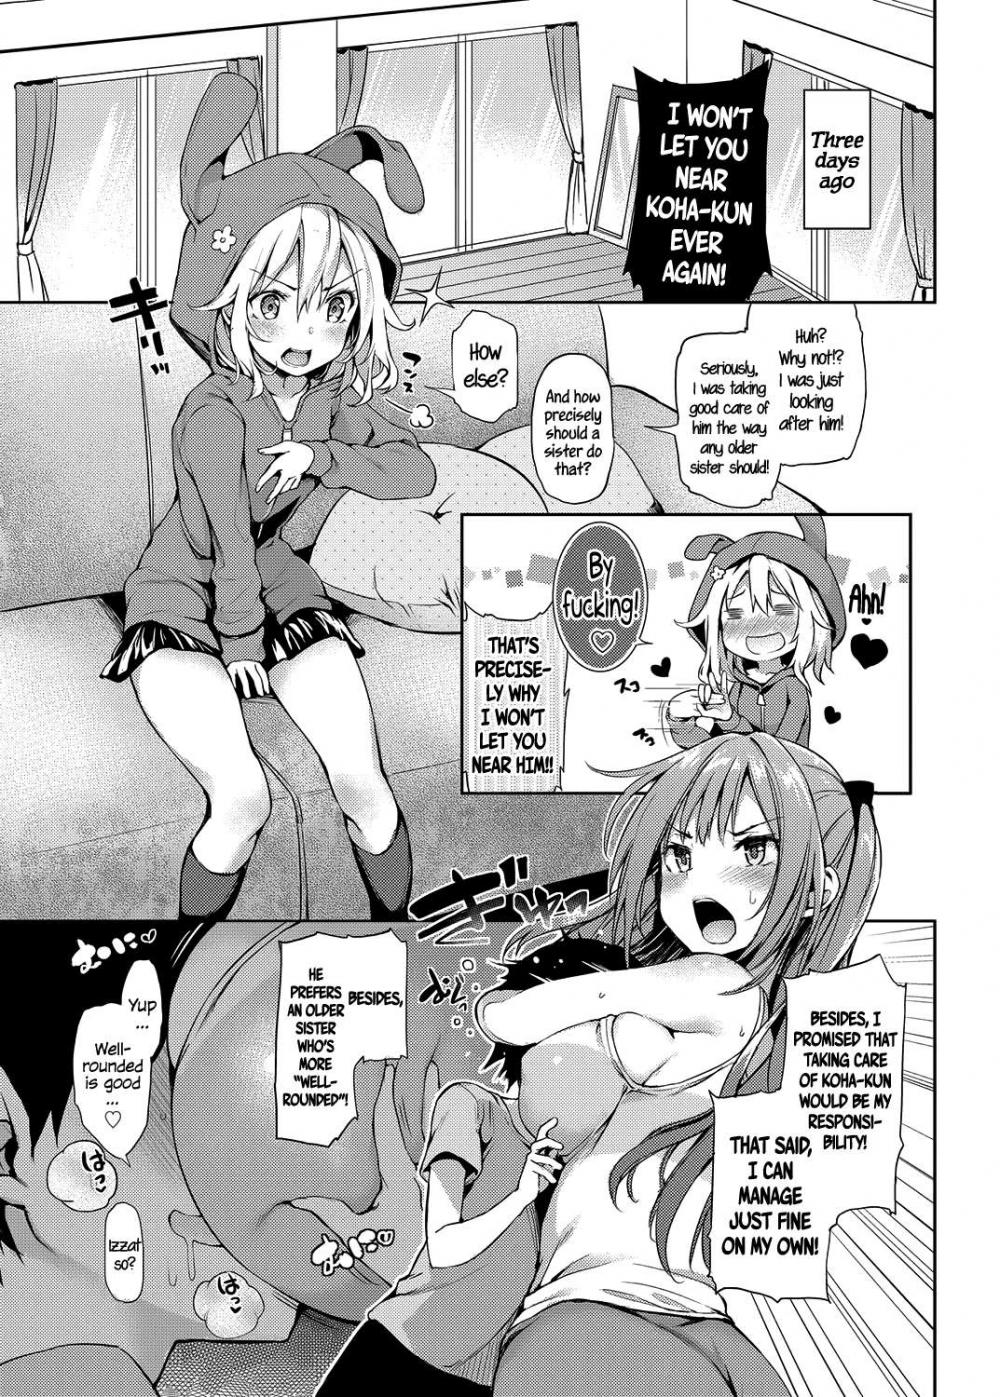 Hentai Manga Comic-The Older Sister Experience for a Week-Chapter 3-3